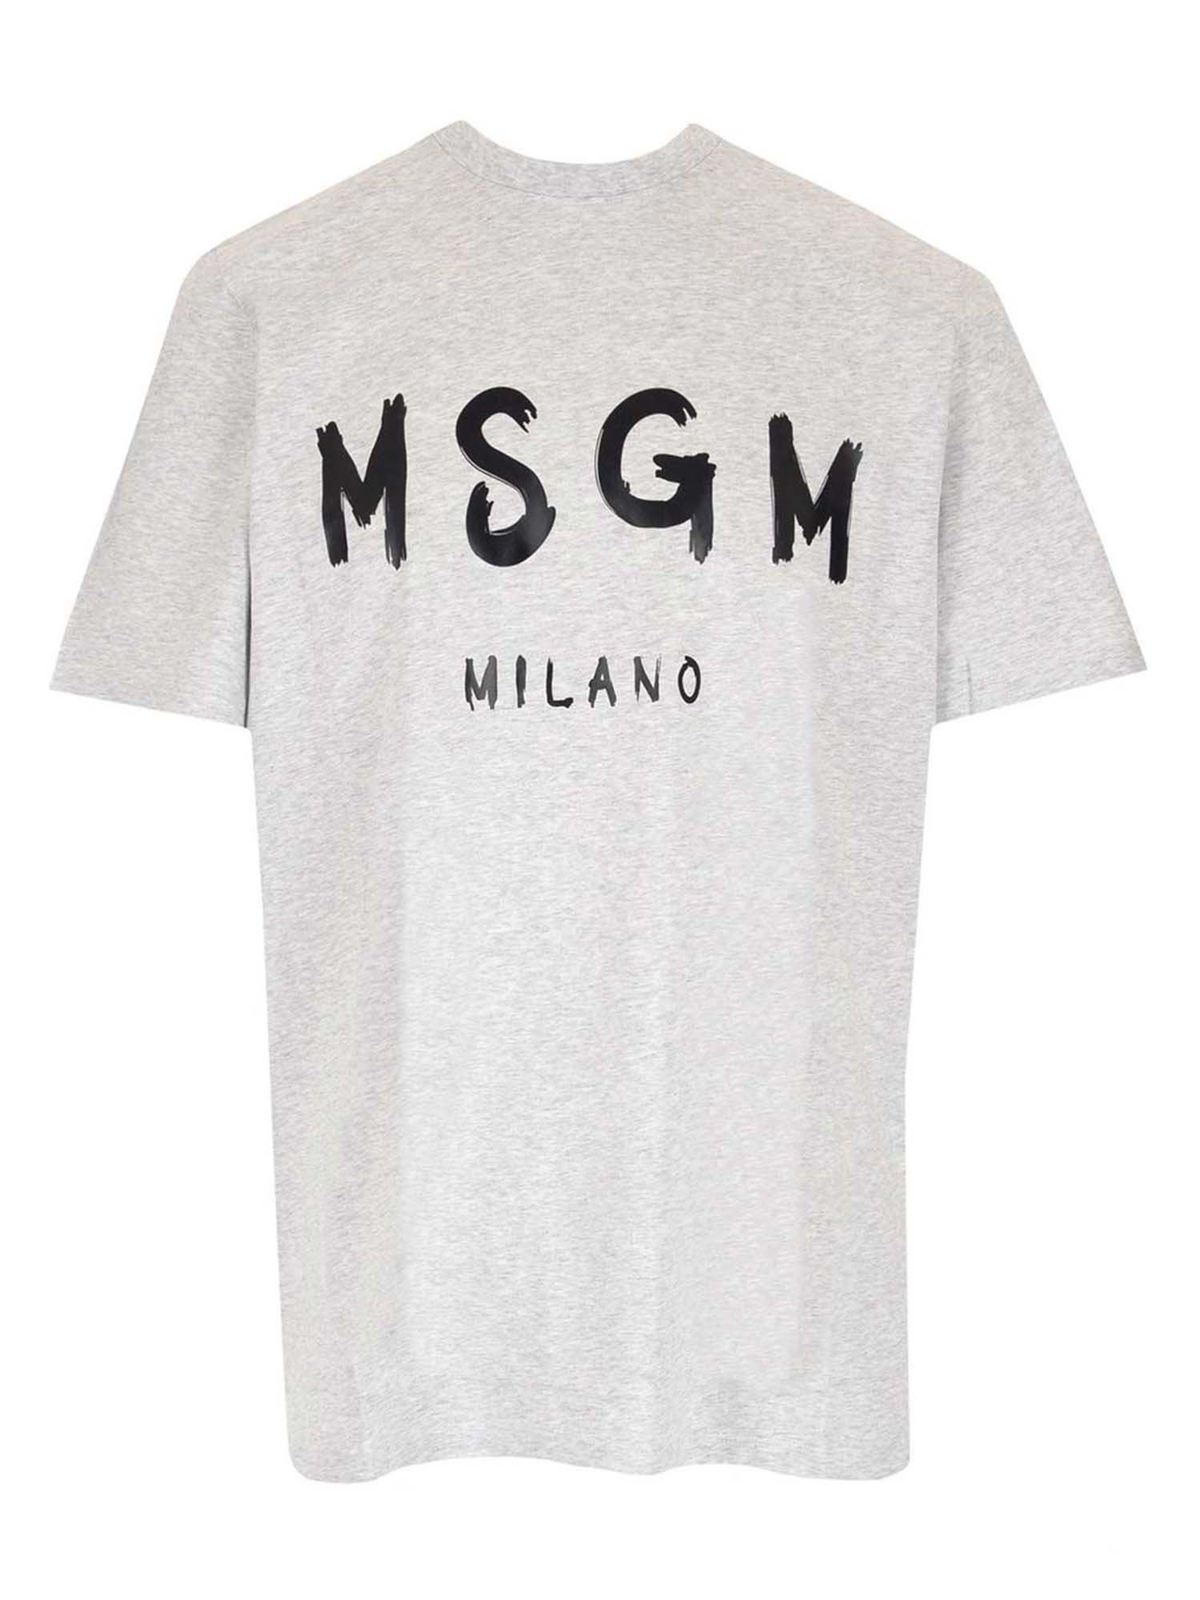 Msgm Logo T-shirt In Grey And Black In Grey